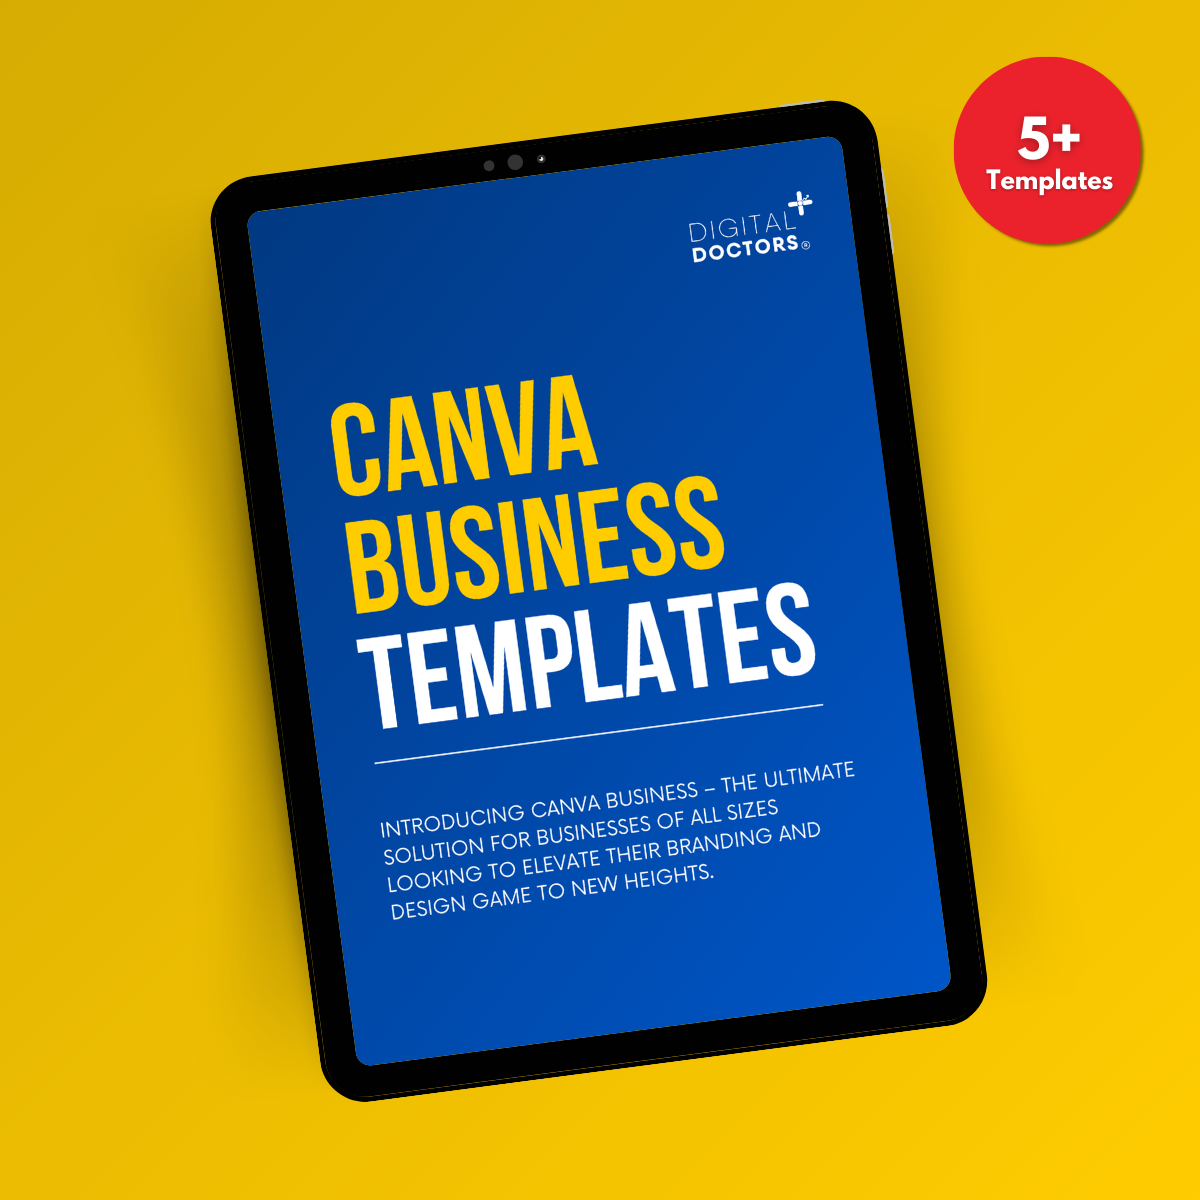 Canva Business Templates